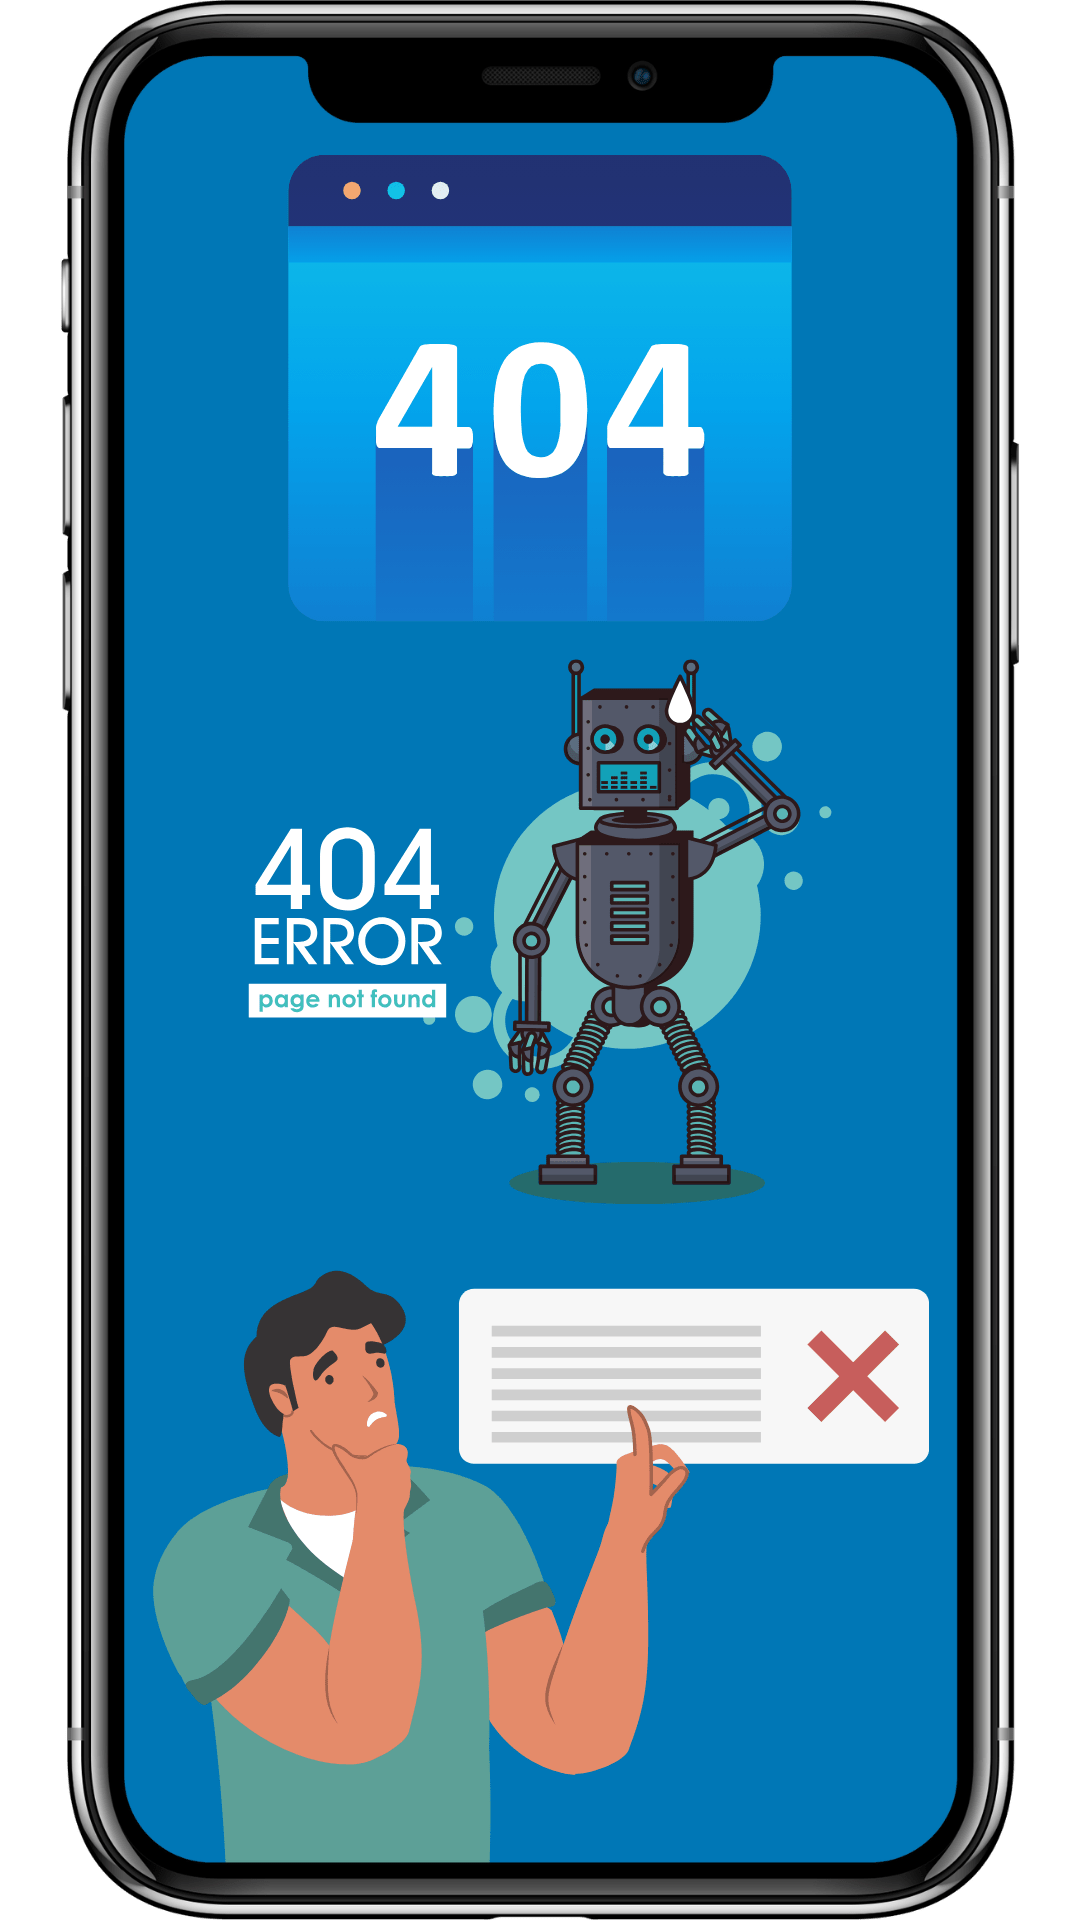 404 error on the mobile